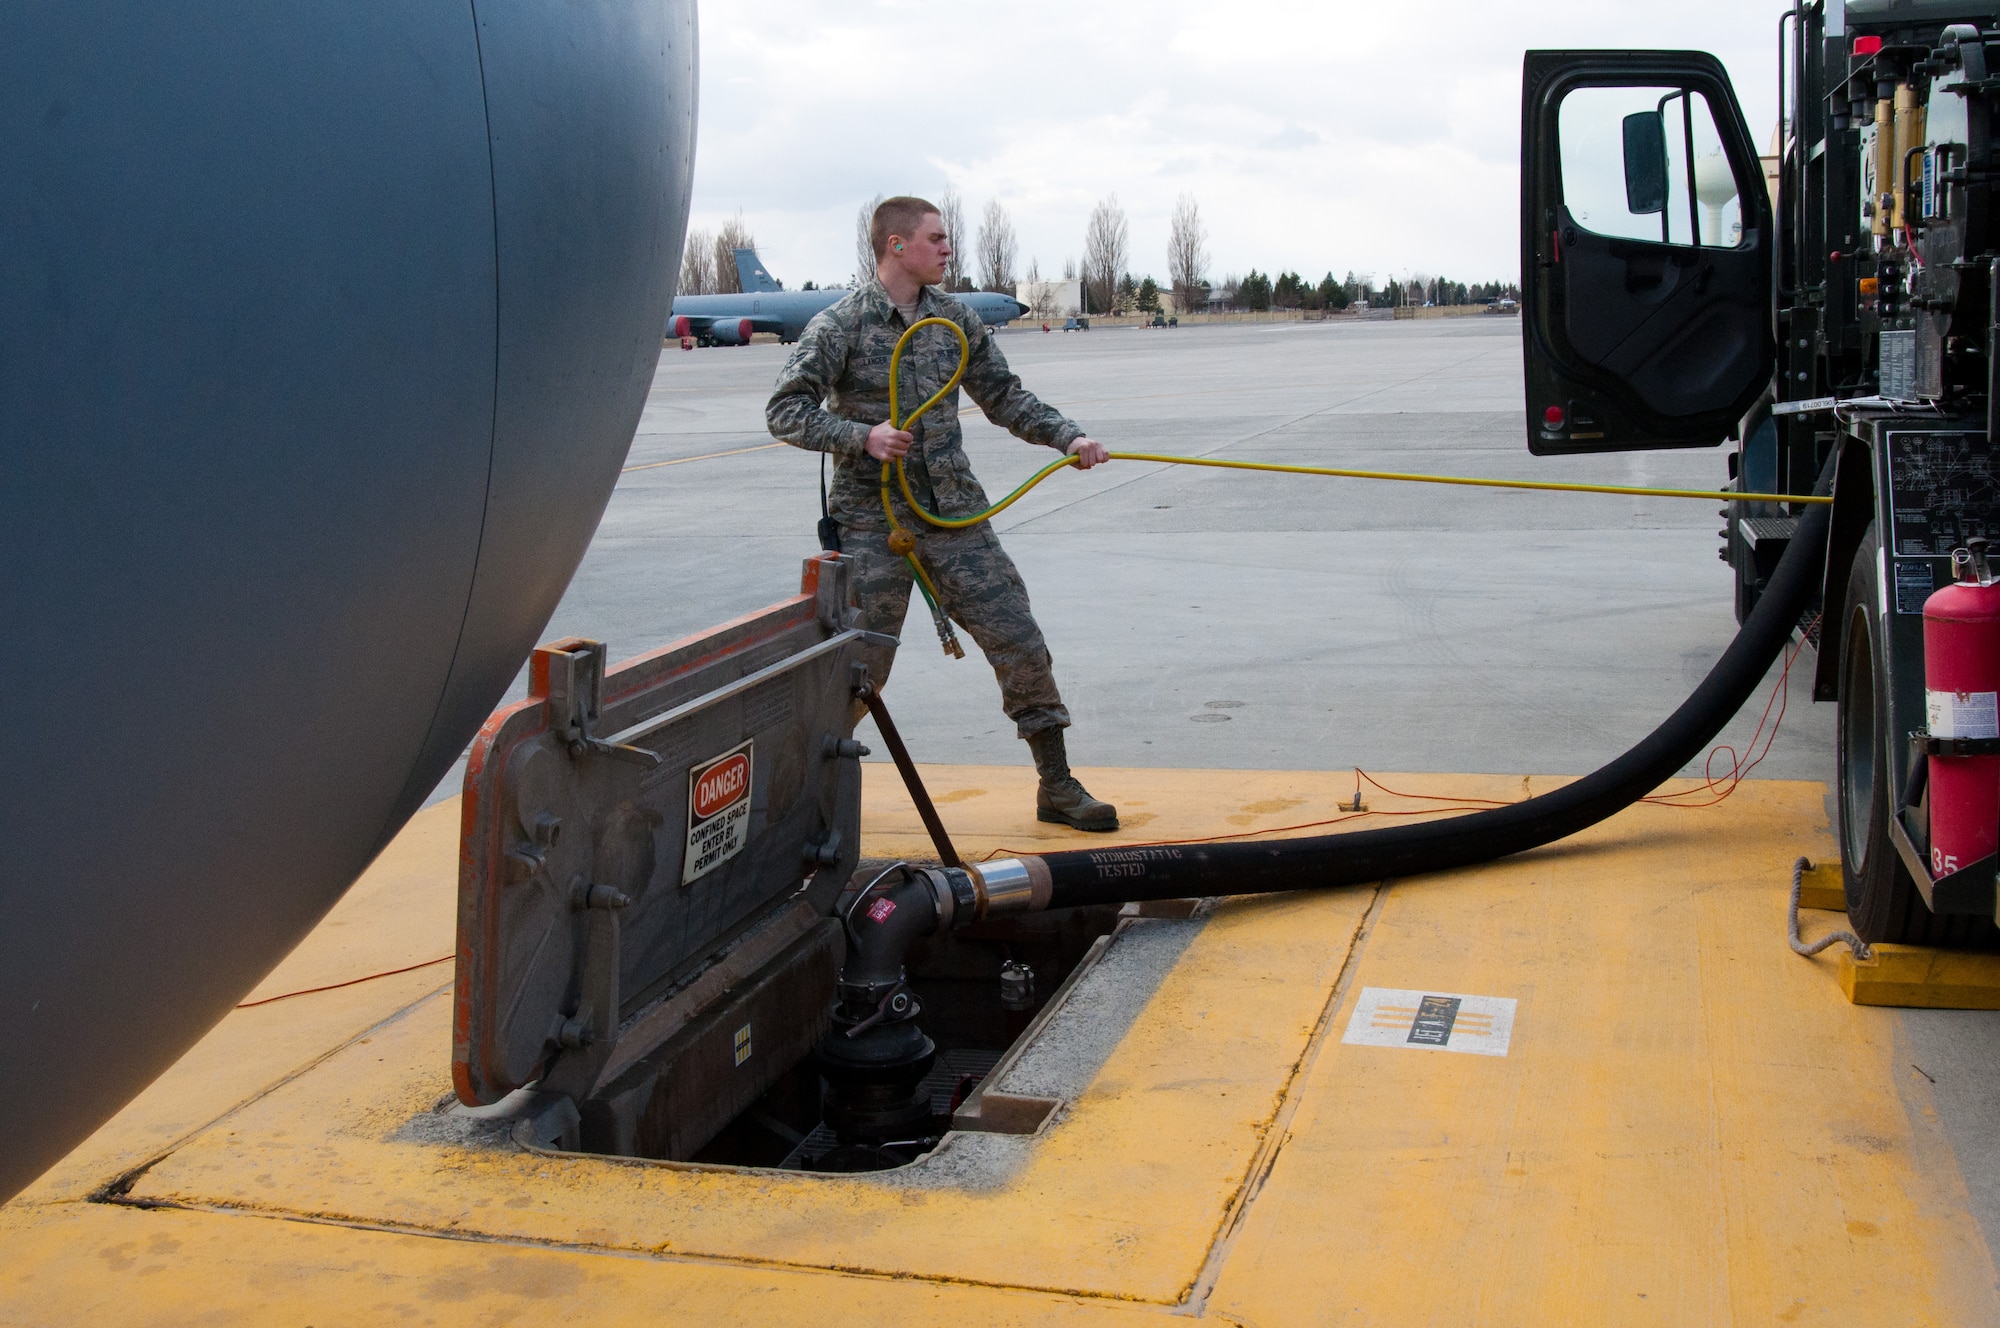 Airman 1st Class Daniel Langer, a 92nd Logistics Readiness Squadron fuels distribution operator, pulls fuel flow sensing lines from an R-12 Fuel Truck in preparation of a KC-135 Stratotanker aircraft refueling operation March 2, 2015, at Fairchild Air Force Base, Wash. Fuels distribution operators work in the Petroleum, Oil and Lubricants flight responsible for filling KC-135 Stratotankers with fuel both for aircraft use and refueling other planes from all branches of the U.S. military as well as some from allied nations. (U.S. Air Force photo/Capt. David Liapis)